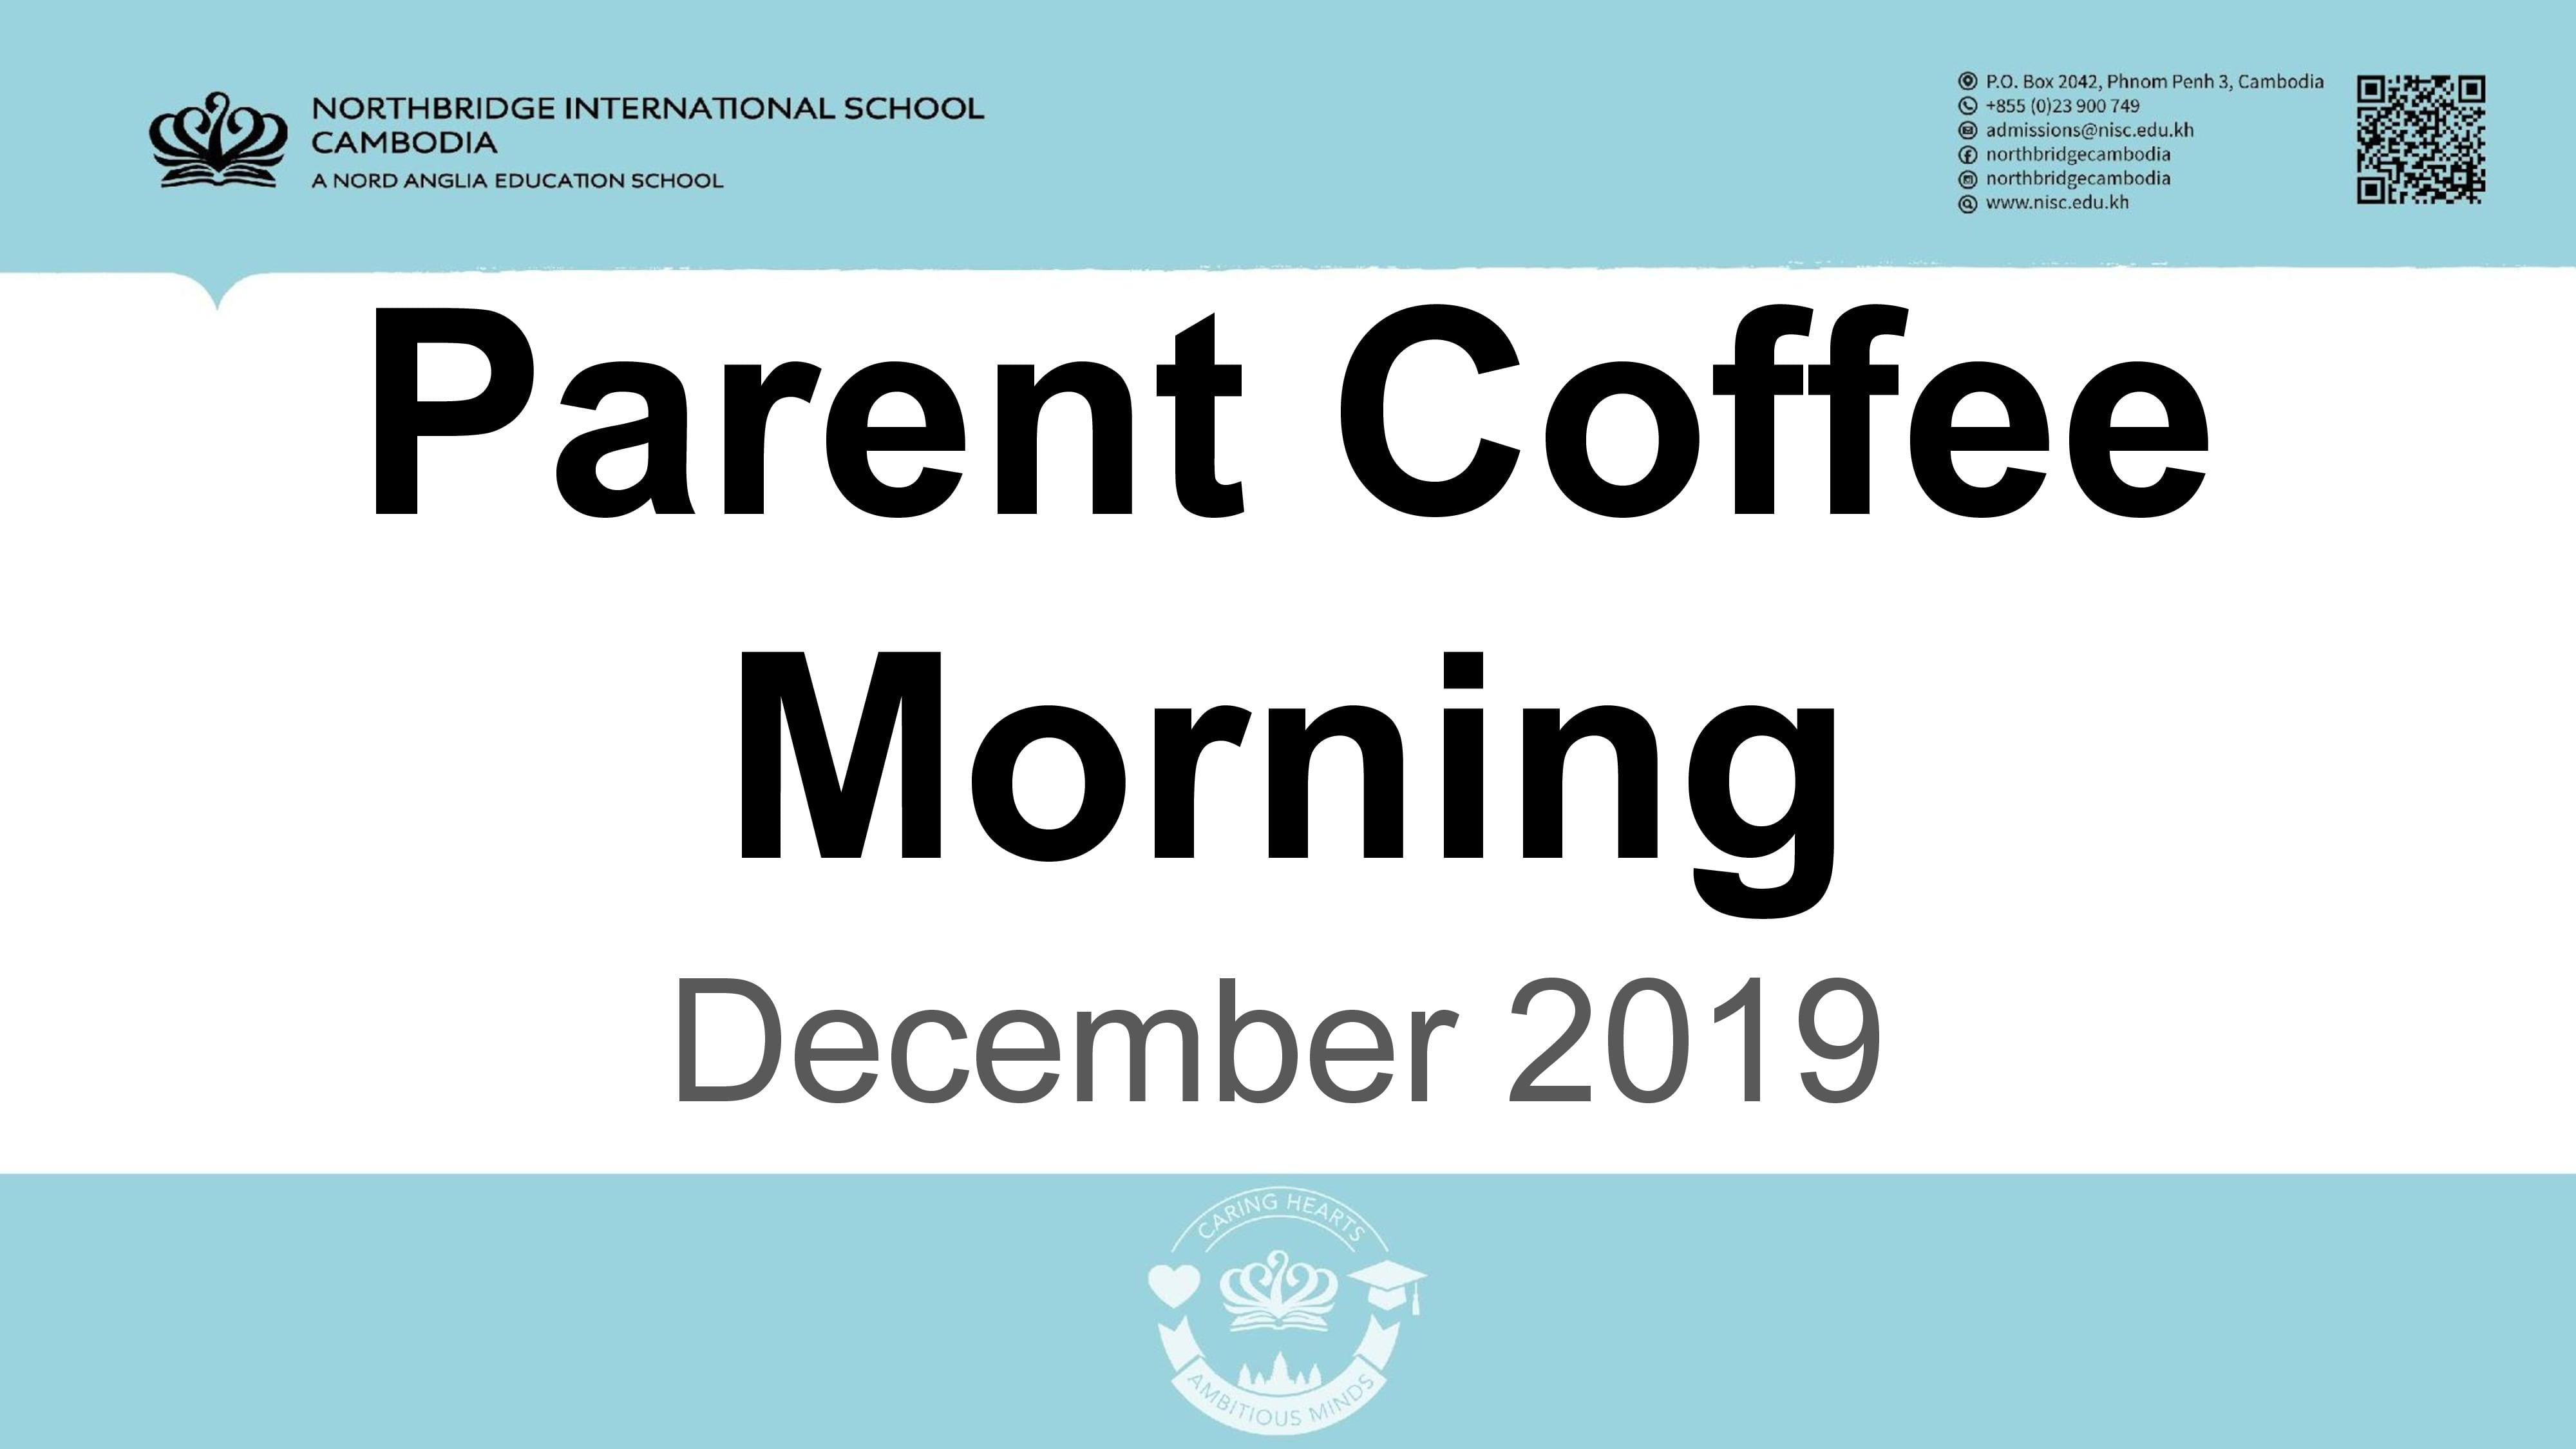 Highlights from the Northbridge Parent Coffee Morning held on Friday 6 December-highlights-from-the-northbridge-parent-coffee-morning-held-on-friday-6-december-Parent Coffee Morning December 2019page001